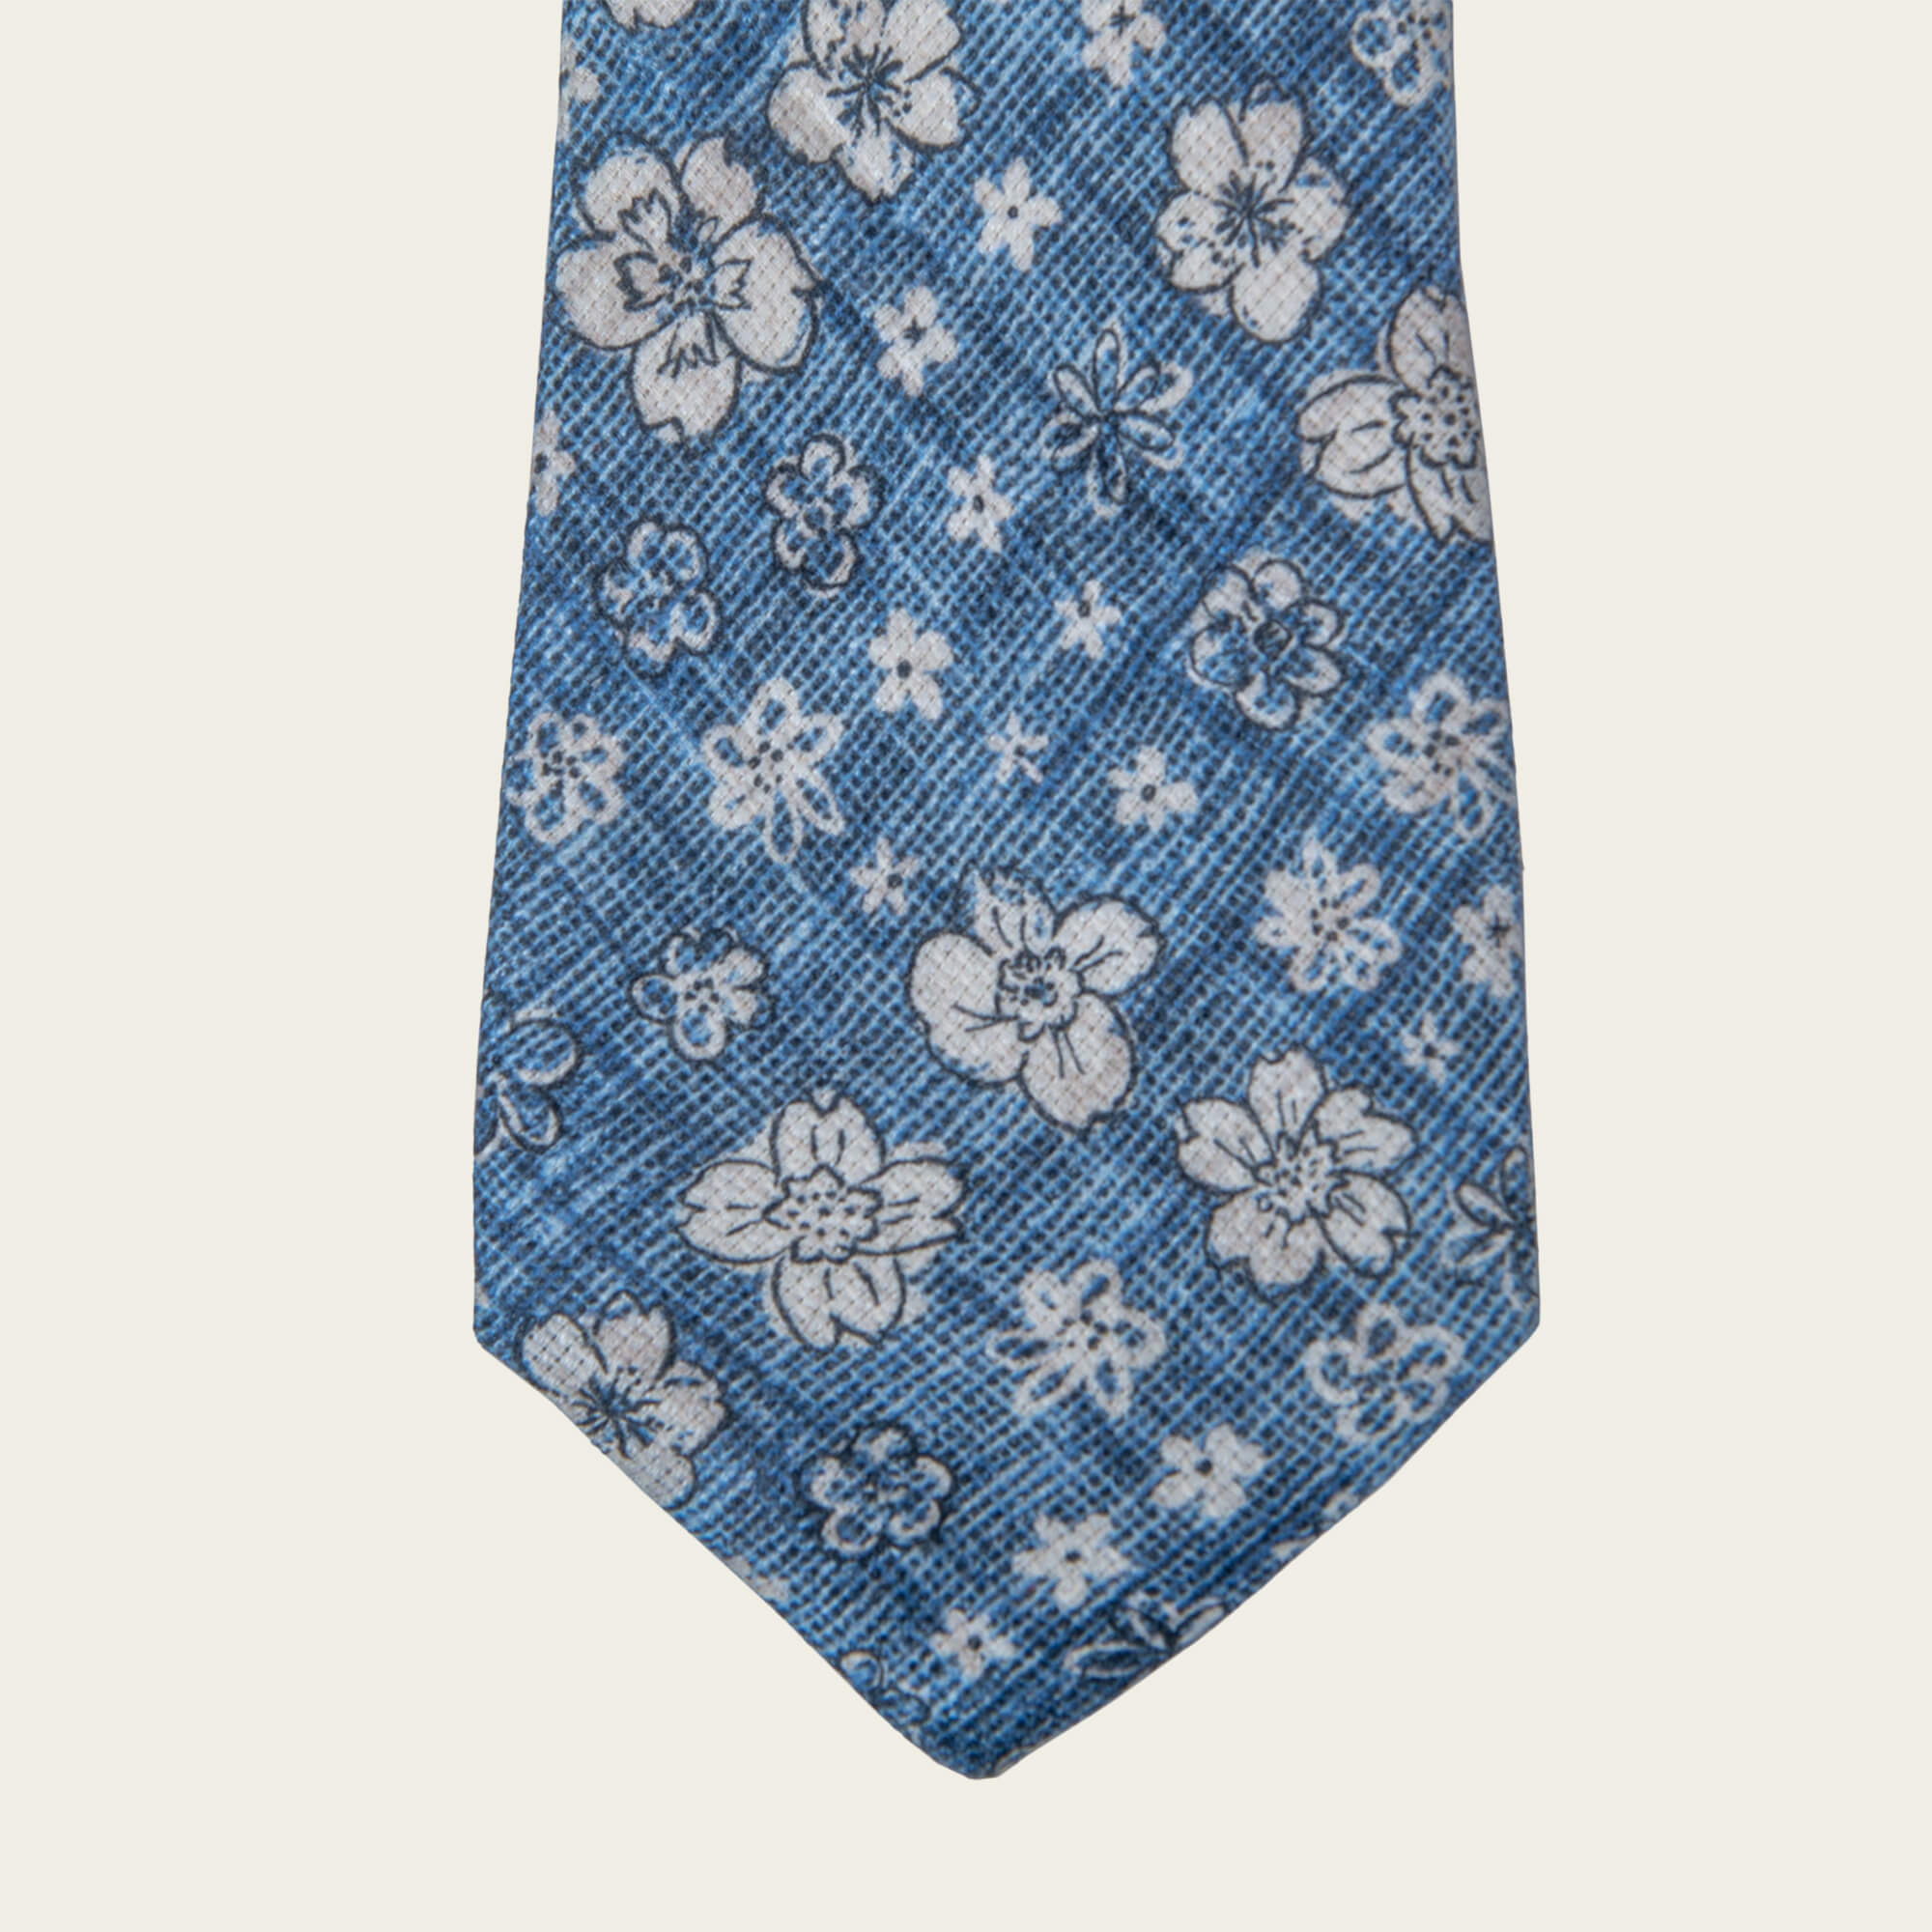 Blue With White Flowers Tie